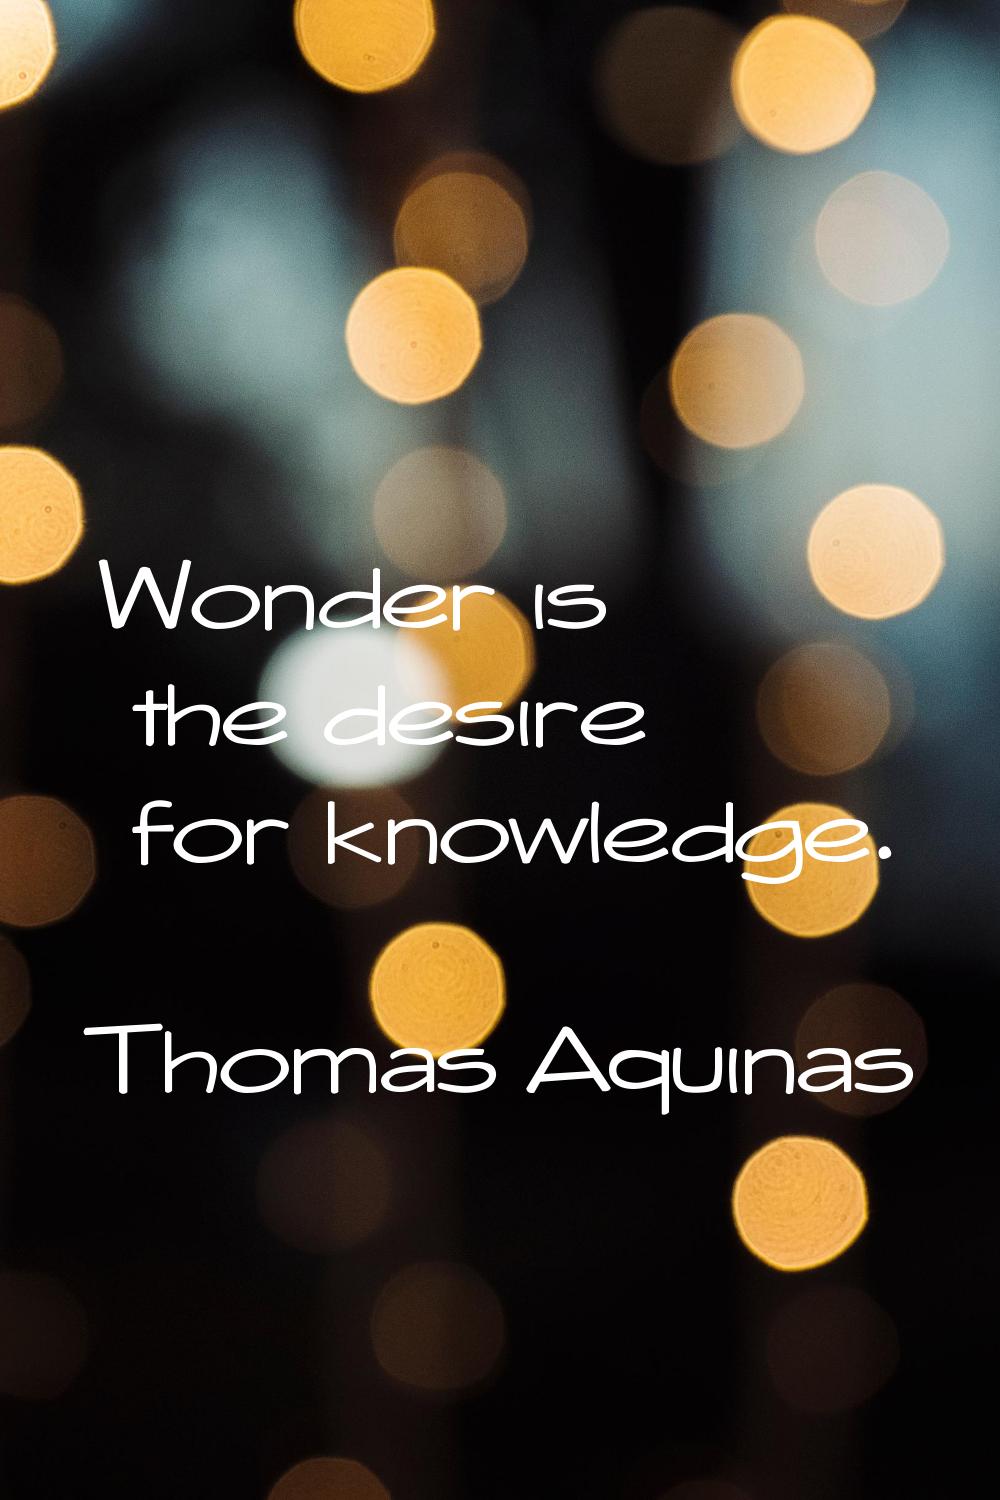 Wonder is the desire for knowledge.